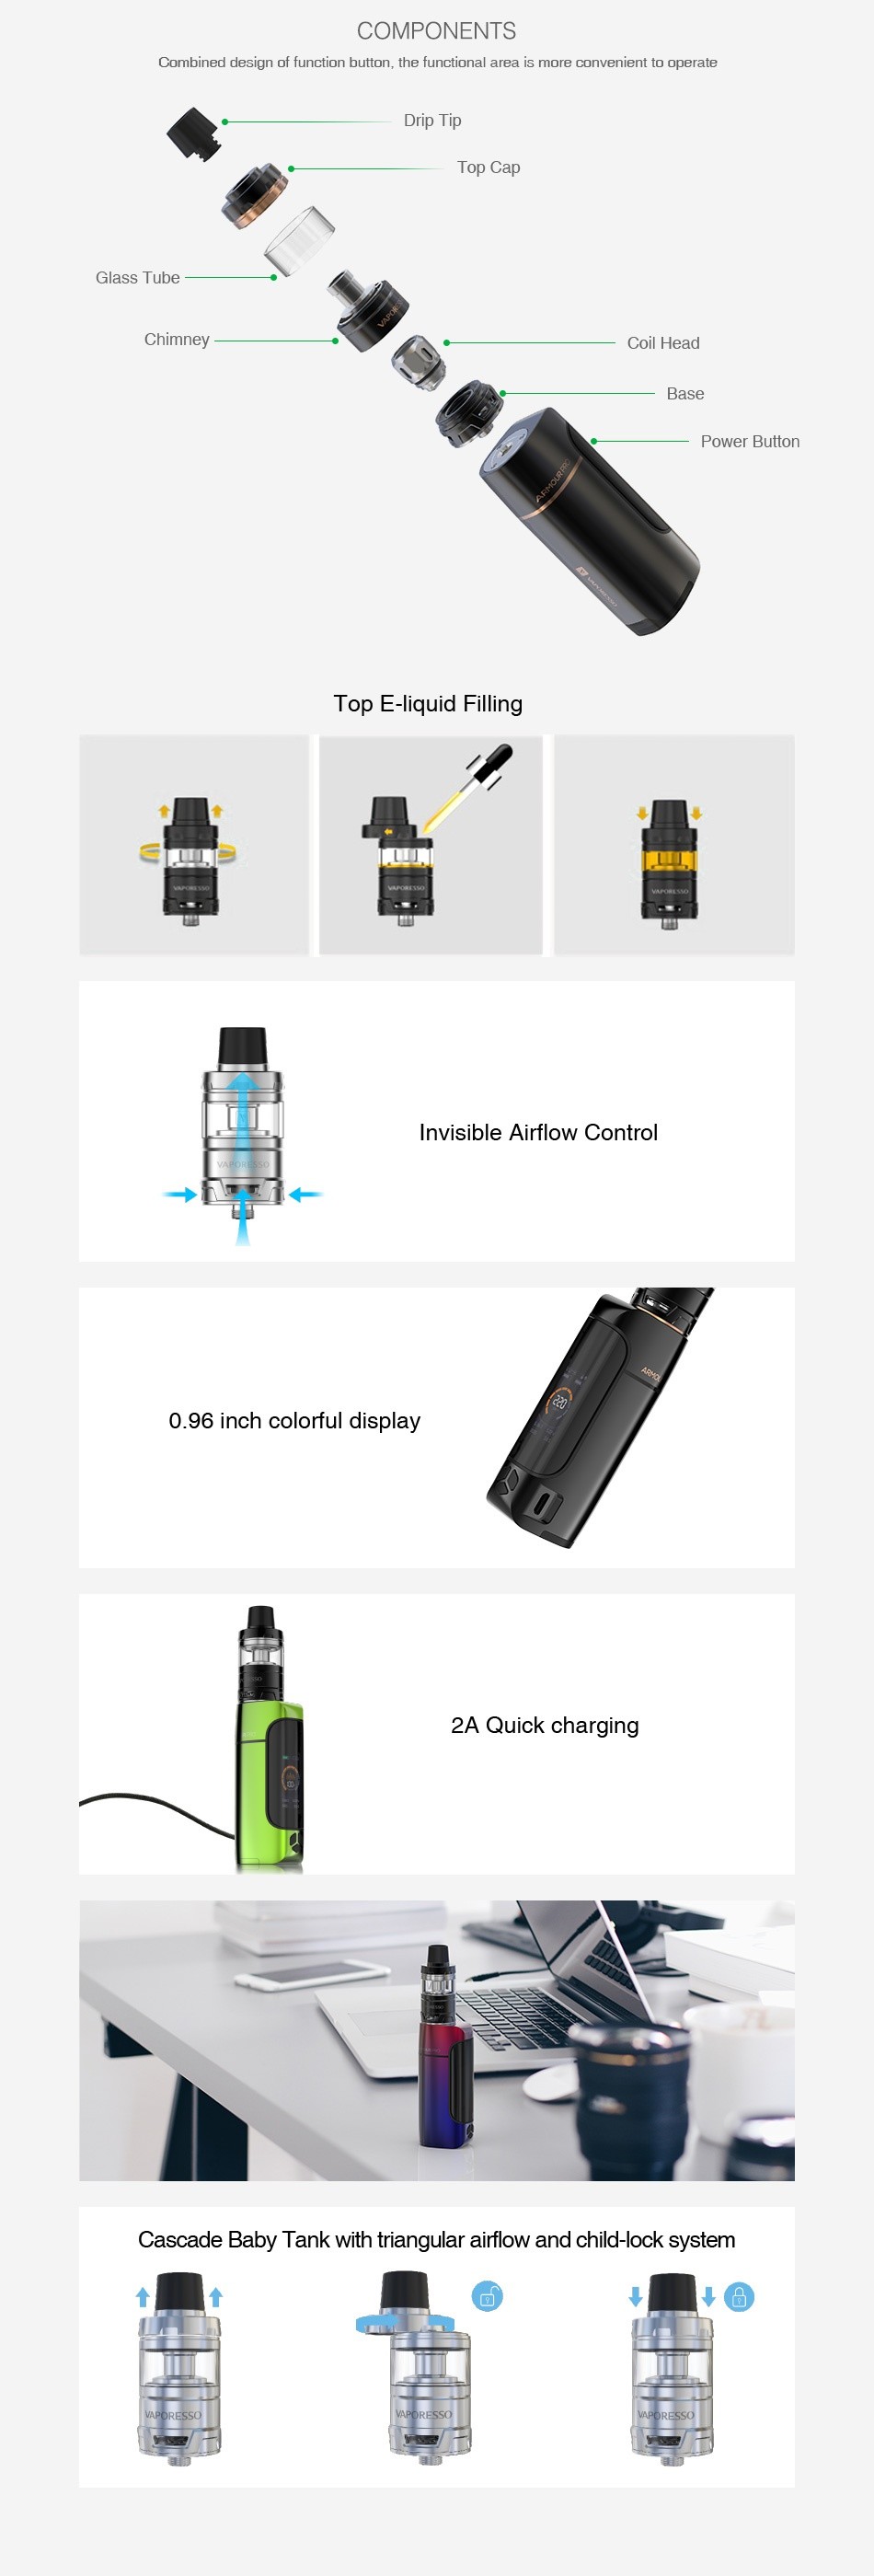 Vaporesso Armour Pro 100W TC Kit with Cascade Baby COMPONENTS Combined design af function button the functional area is more Drip Tip Class Tube op E liquid Filling nvisible airflow contro 0 96 inch colorful display 2A Cascade Baby Tank with triangular airflow and child lock system